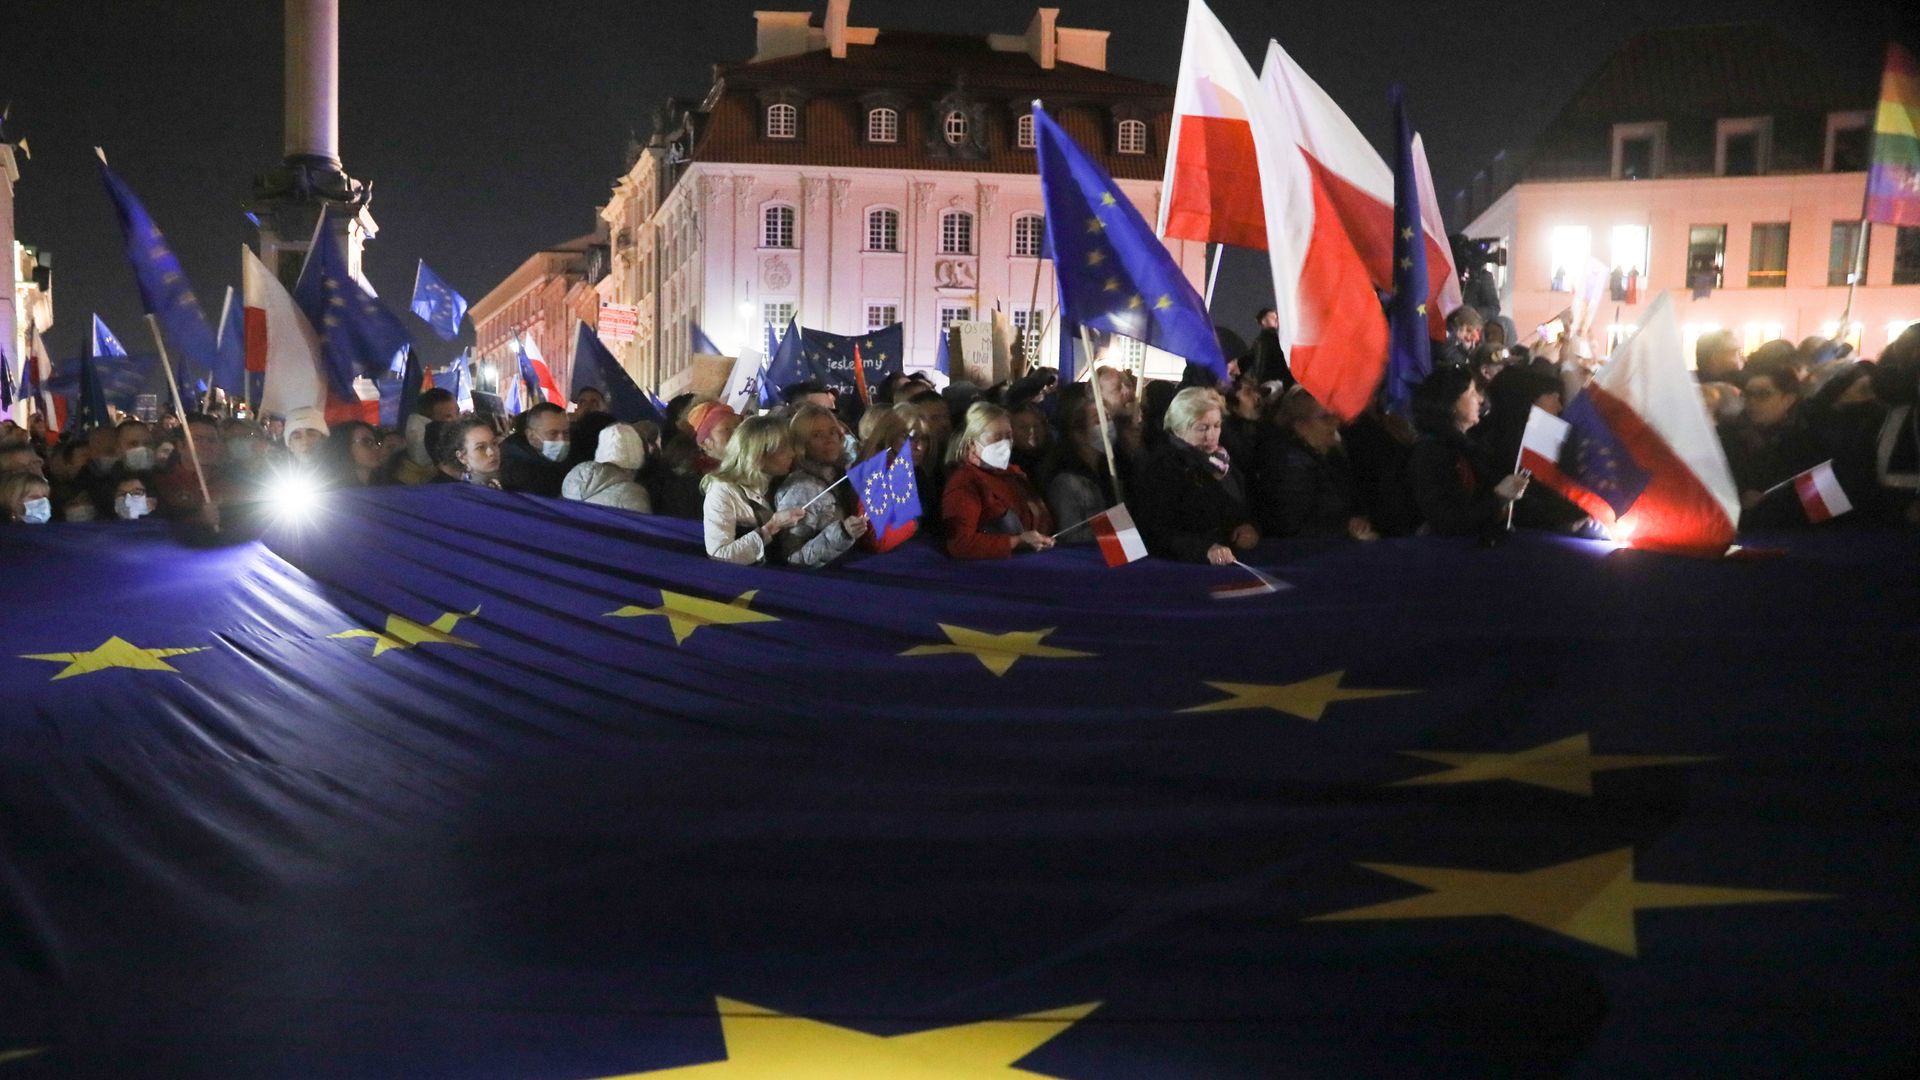 Pro Europe protesters gather at Plac Zamkowy, in Warsaw's Old Town